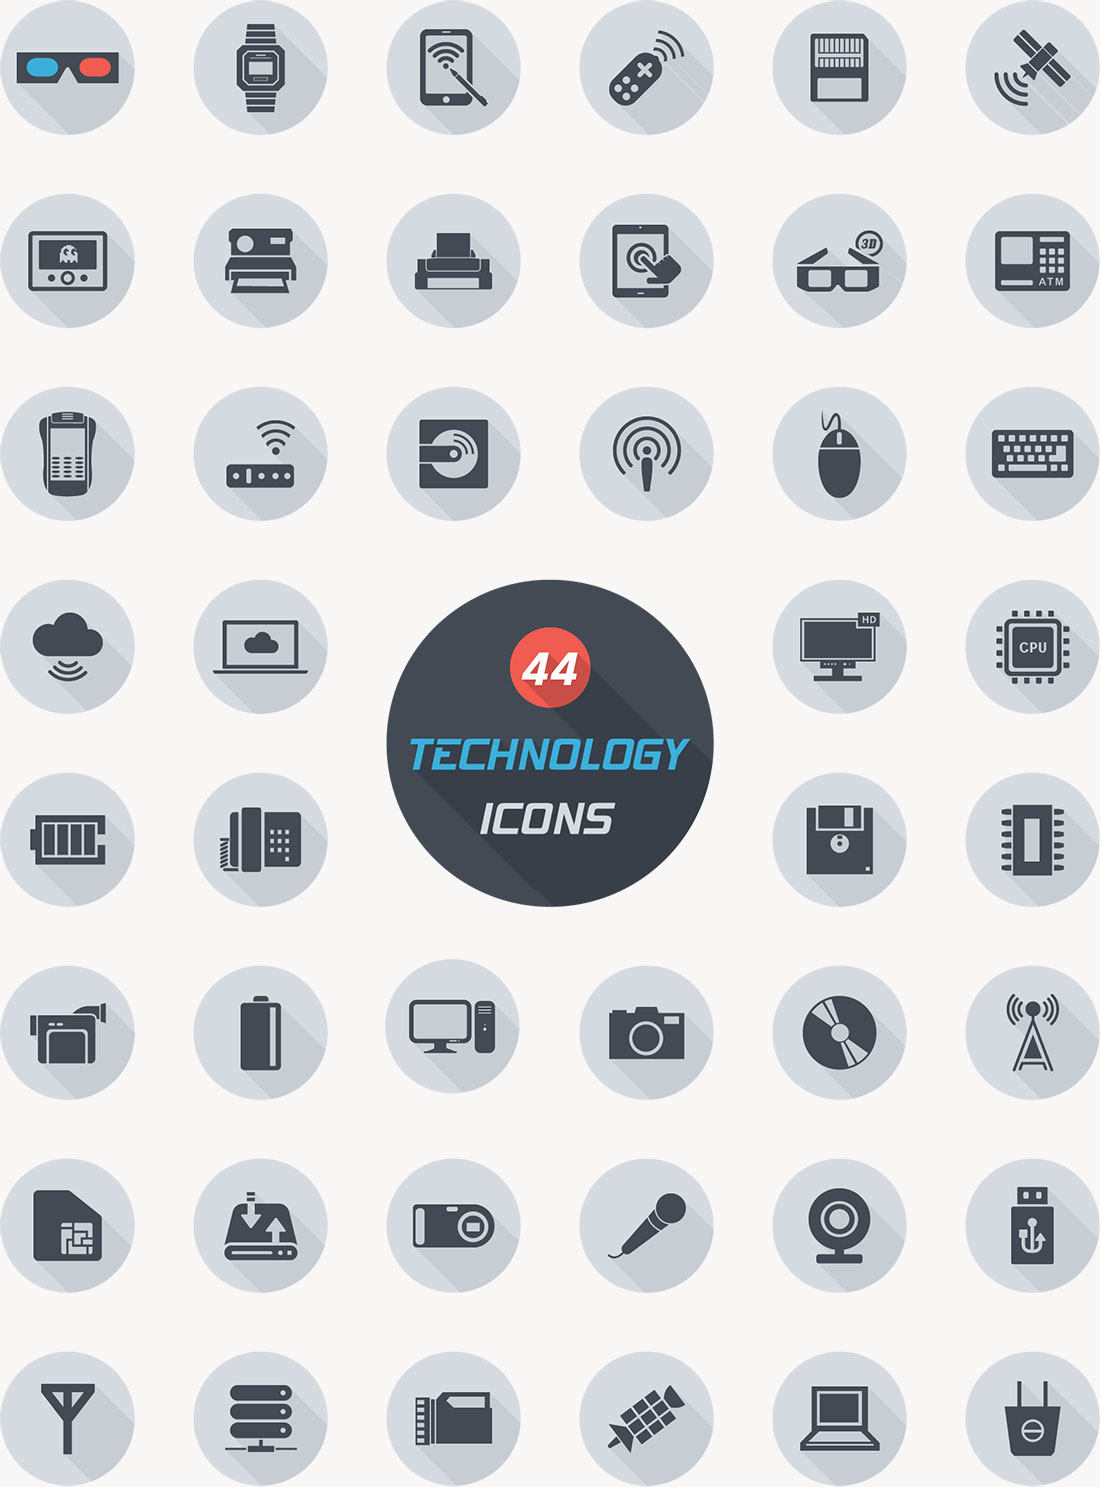 11 Free Icon Sets Tech Images - Free Technology Icons Clip Art 